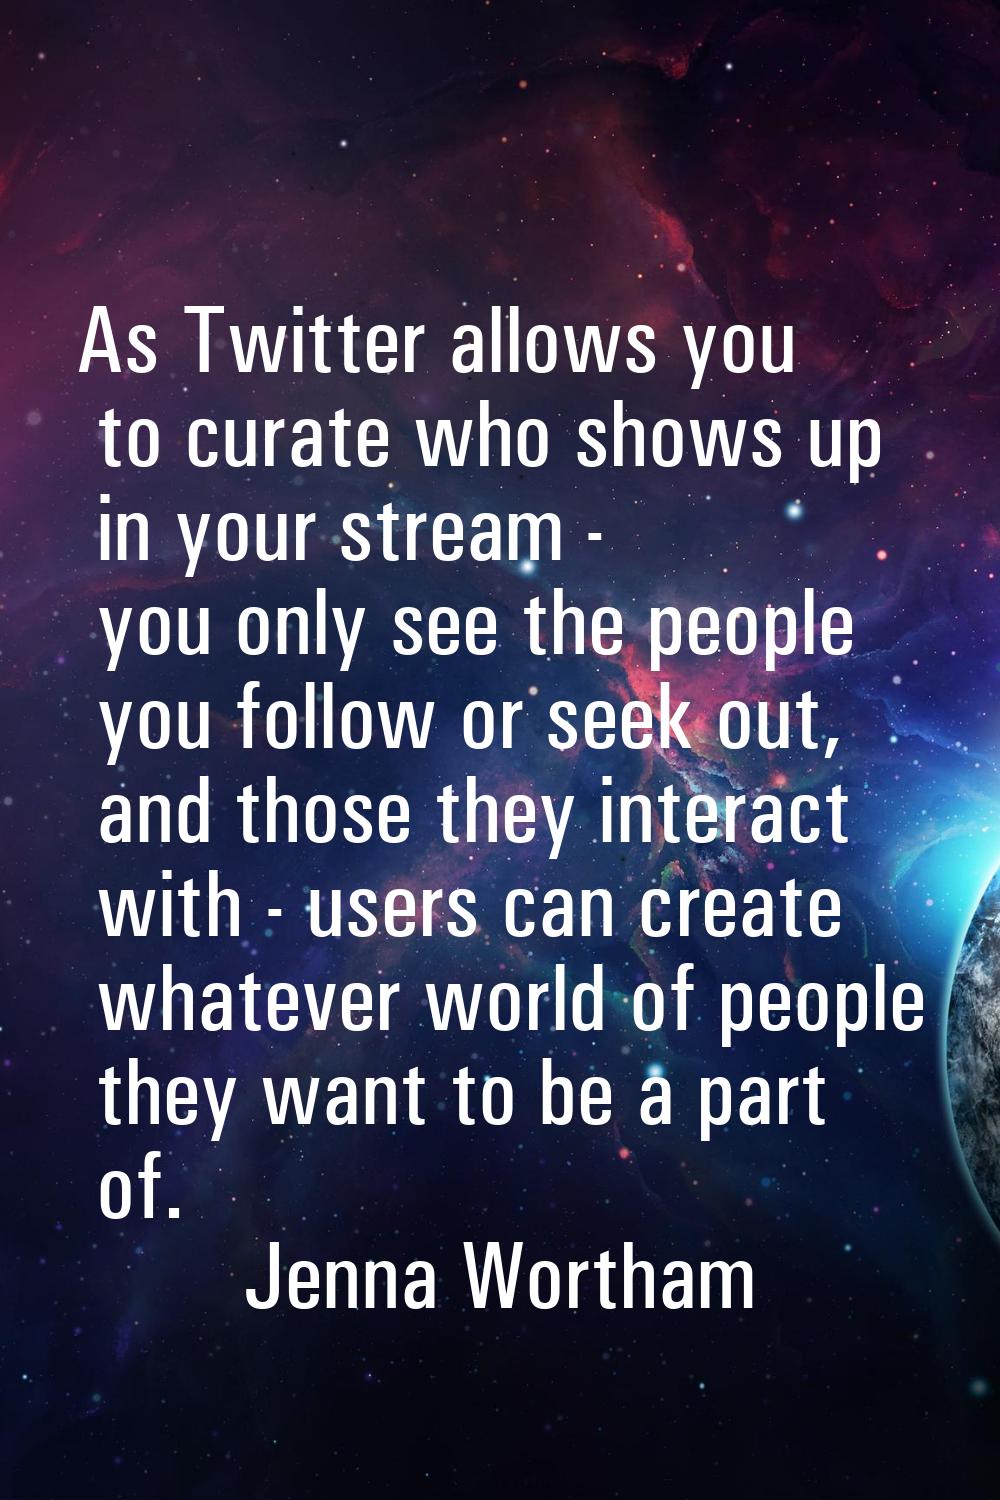 As Twitter allows you to curate who shows up in your stream - you only see the people you follow or